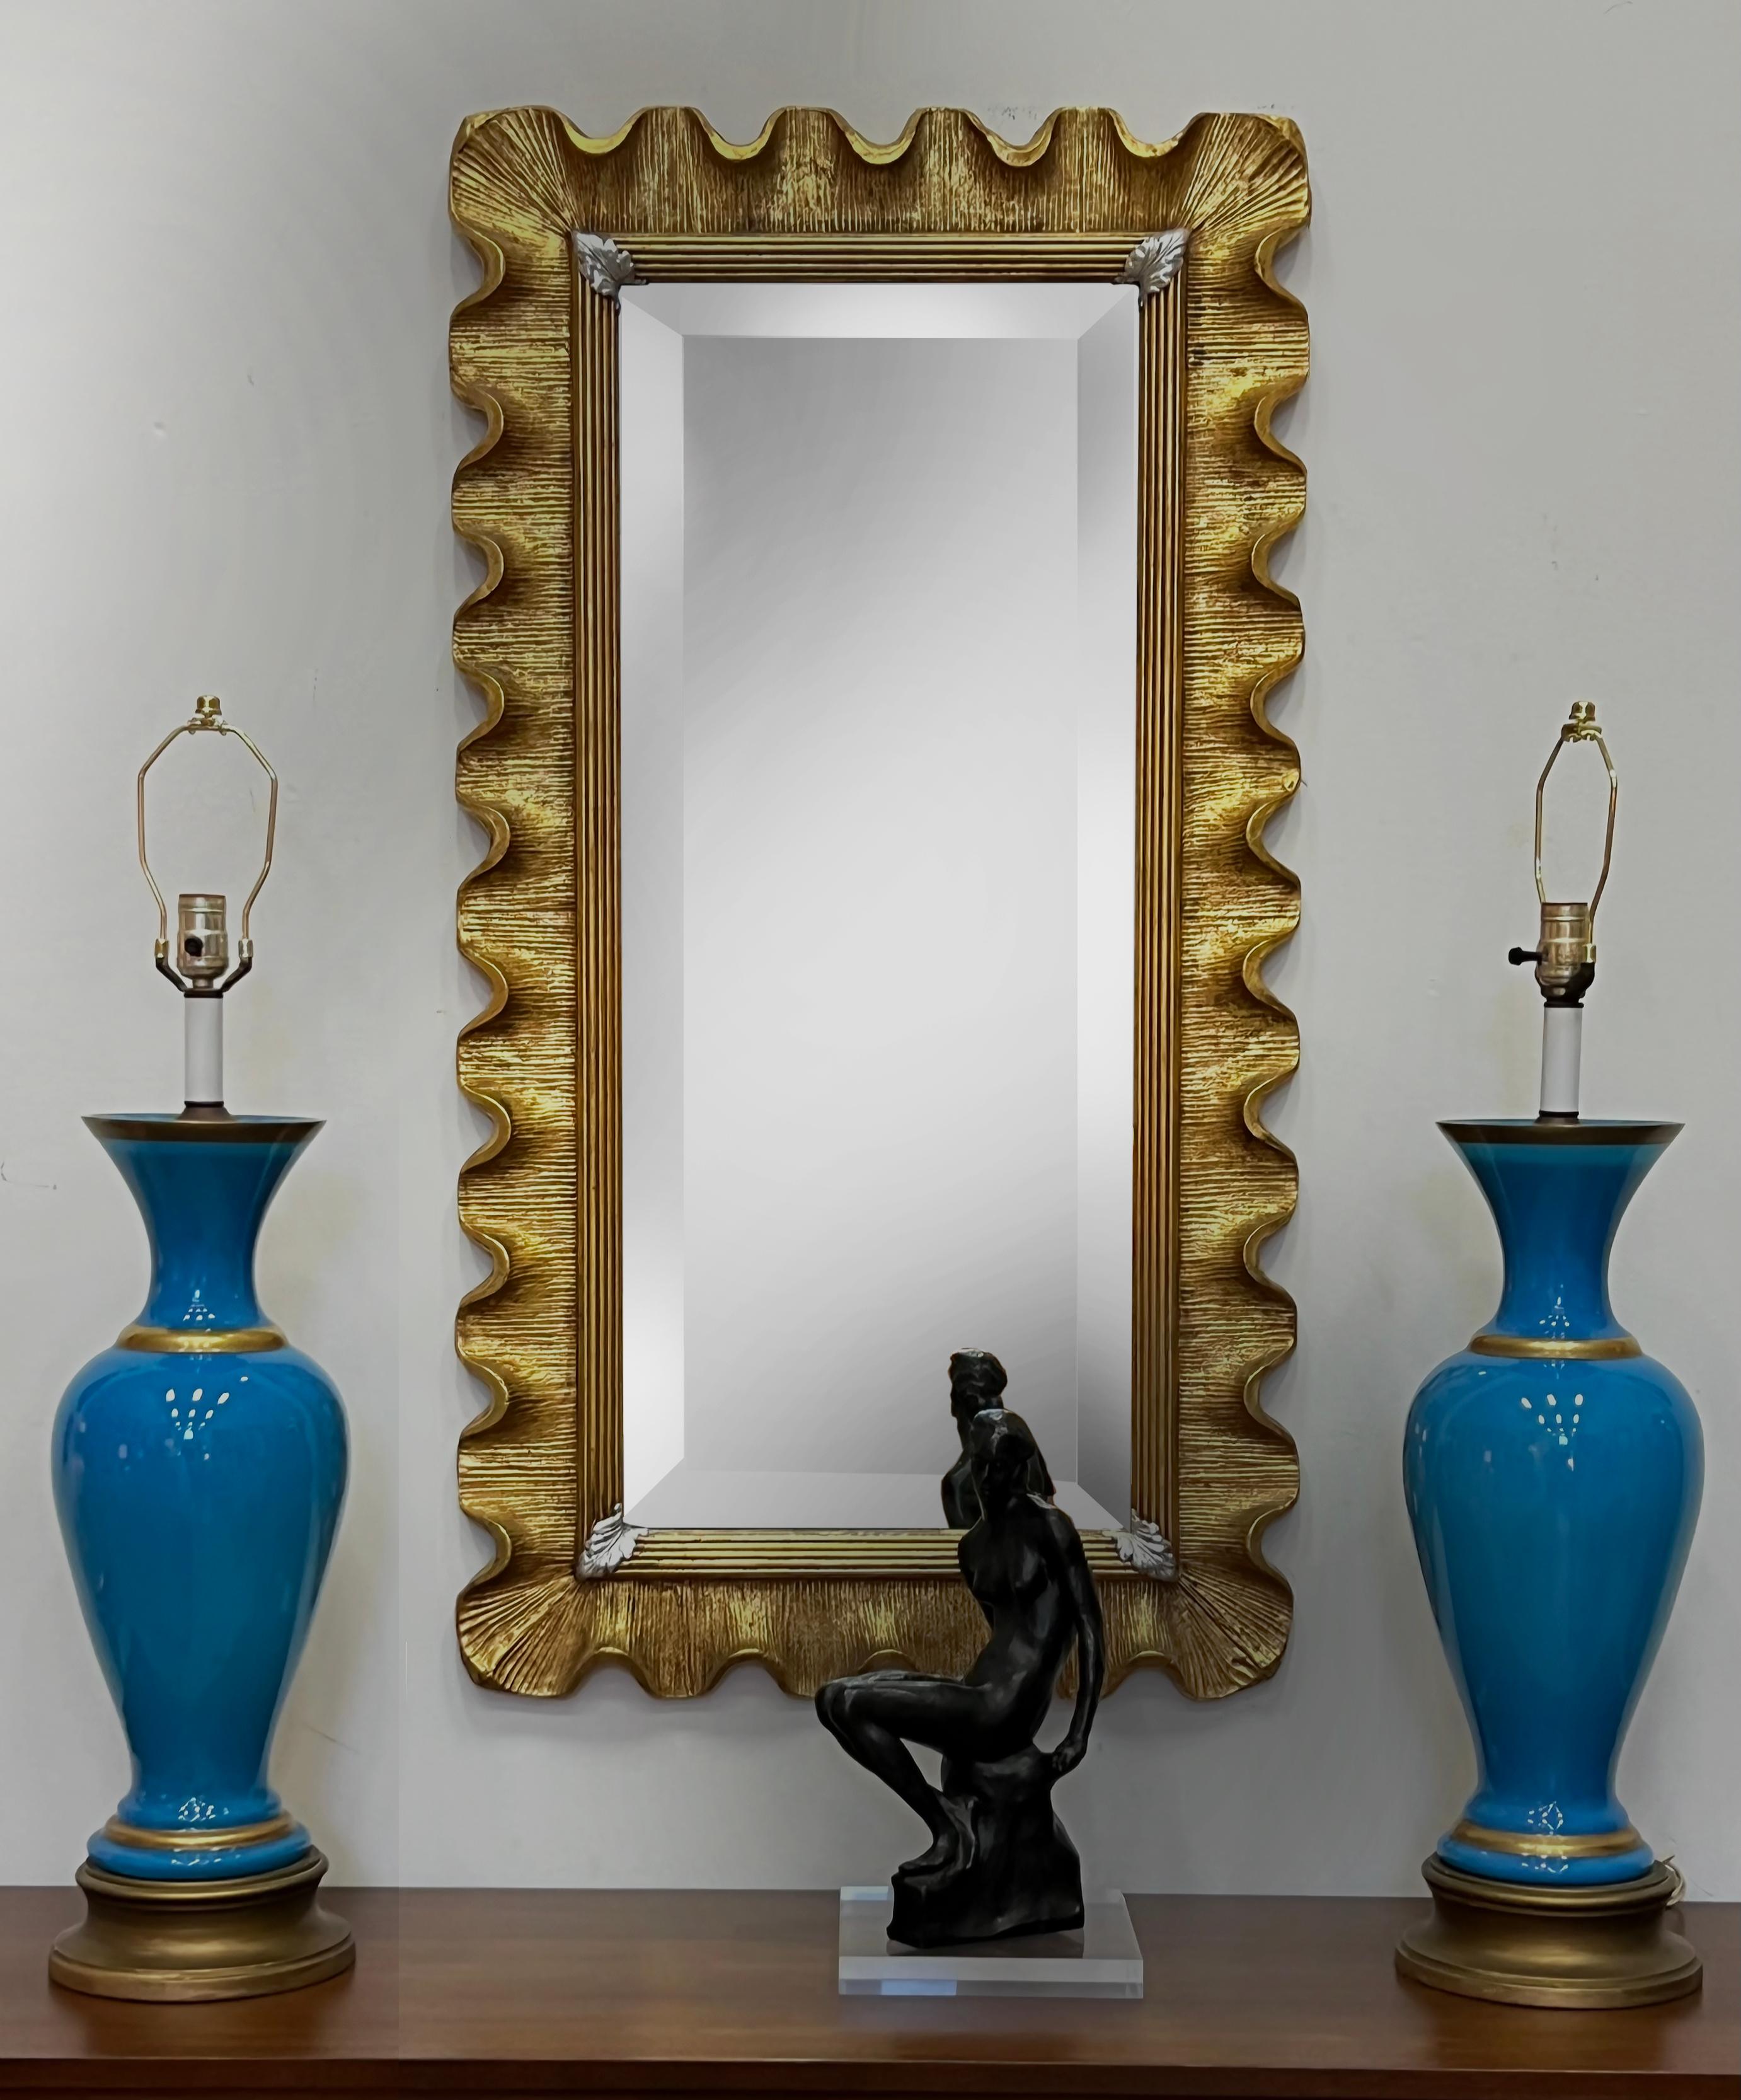 Vintage Carved Scalloped Edge Italian Giltwood Beveled Mirror 

Offered for sale is a vintage Italian Hollywood Regency beveled mirror. The gilt-wood frame has a carved scalloped edge. The mirror can be hung horizontally as well as vertically.